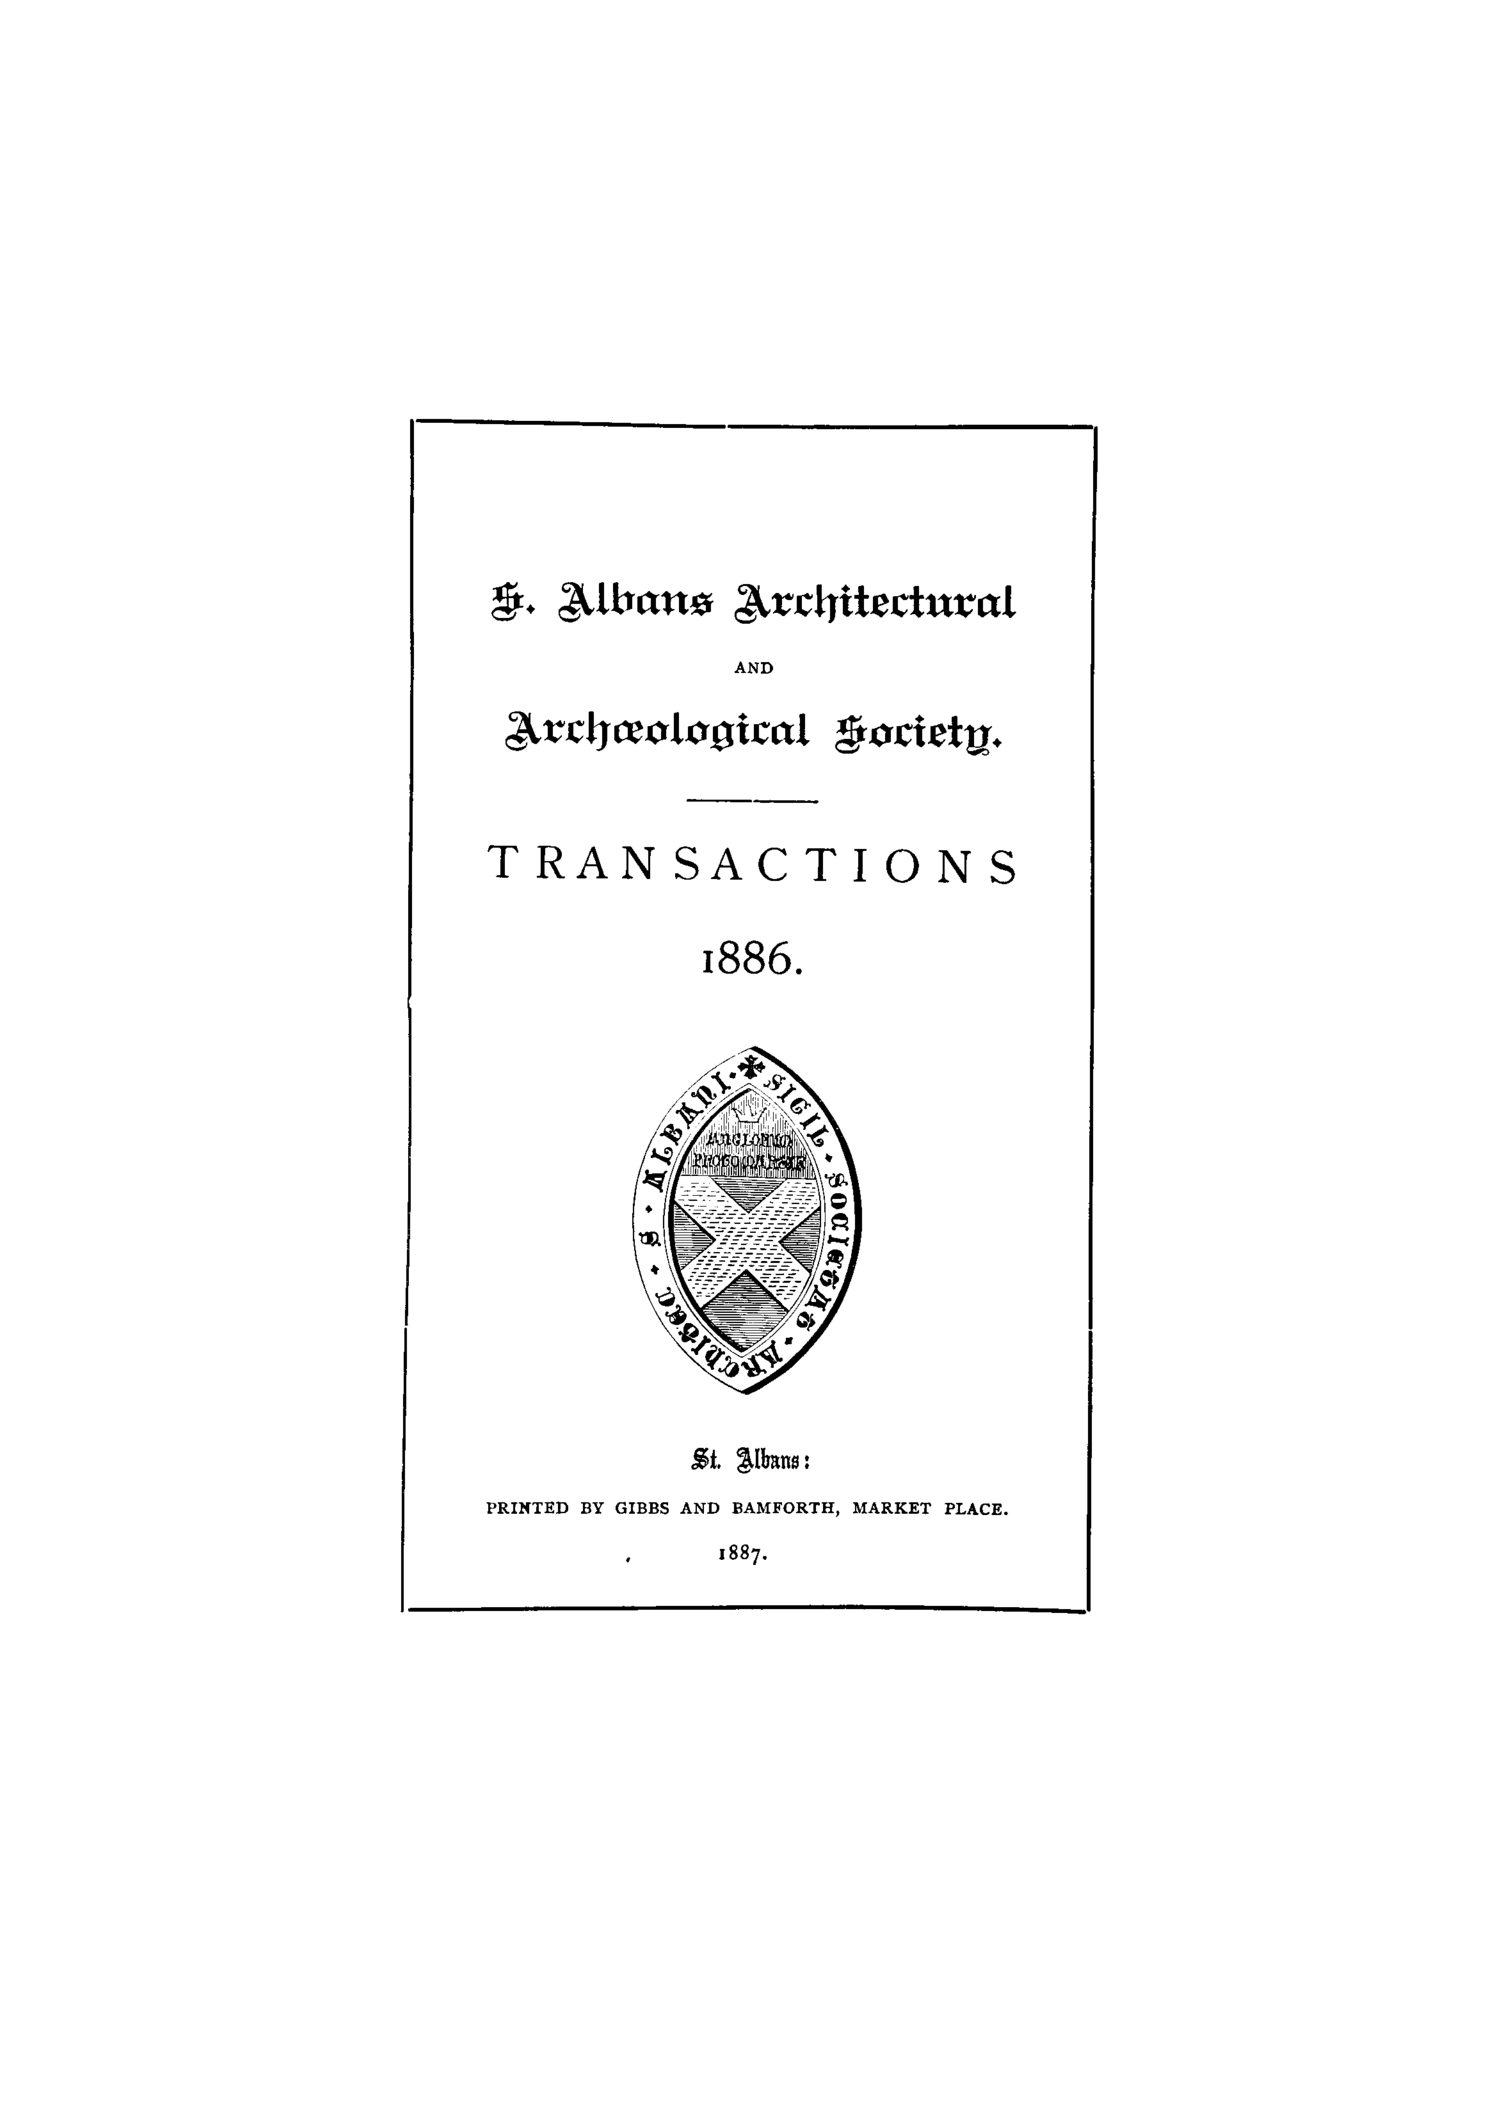 Transactions of the Society (1886)